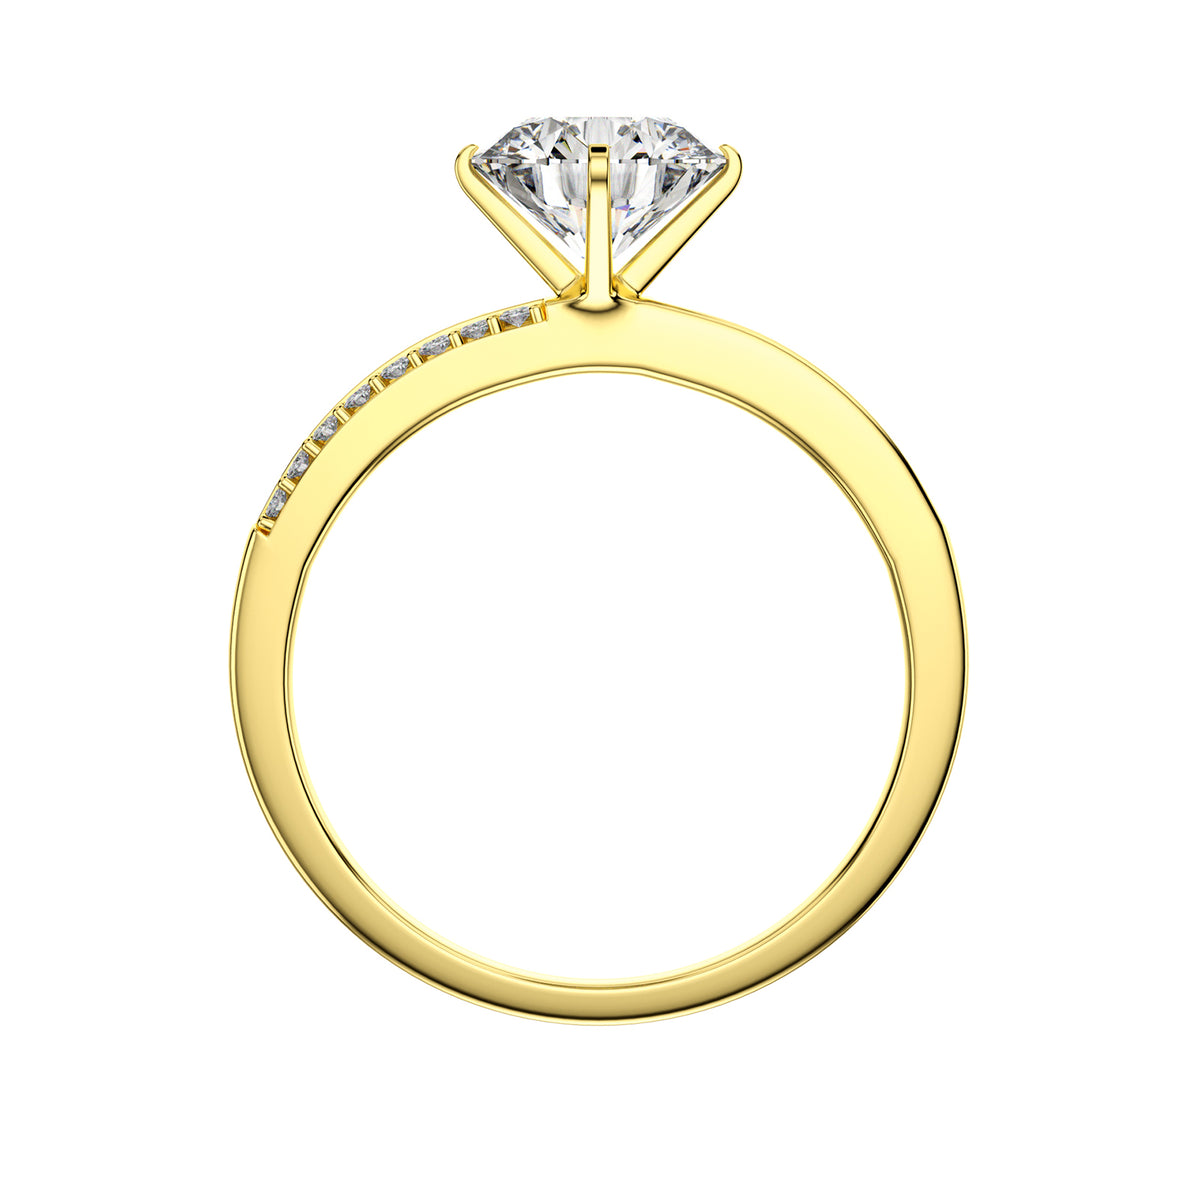 1 Row Accented Round Cut Moissanite Diamond Ring in Yellow/White Gold